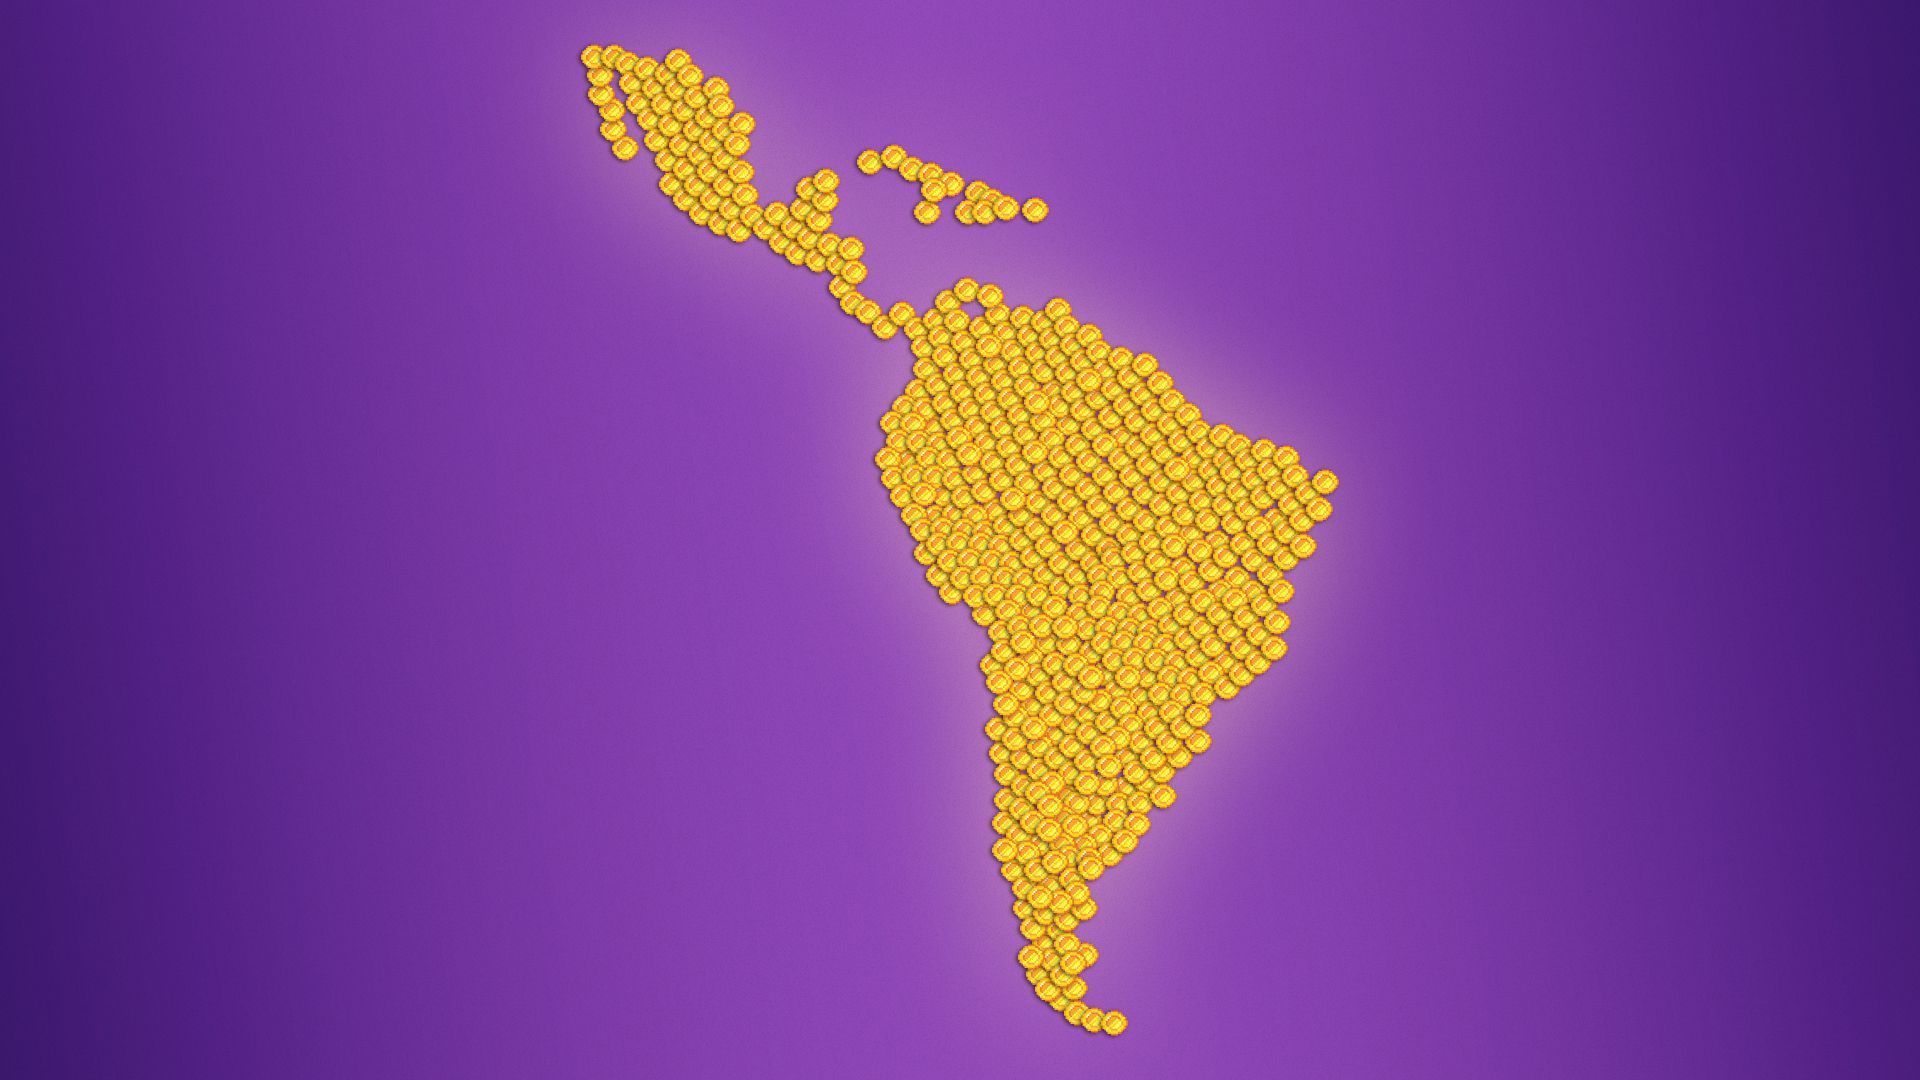 Illustration of Latin America made out of coins